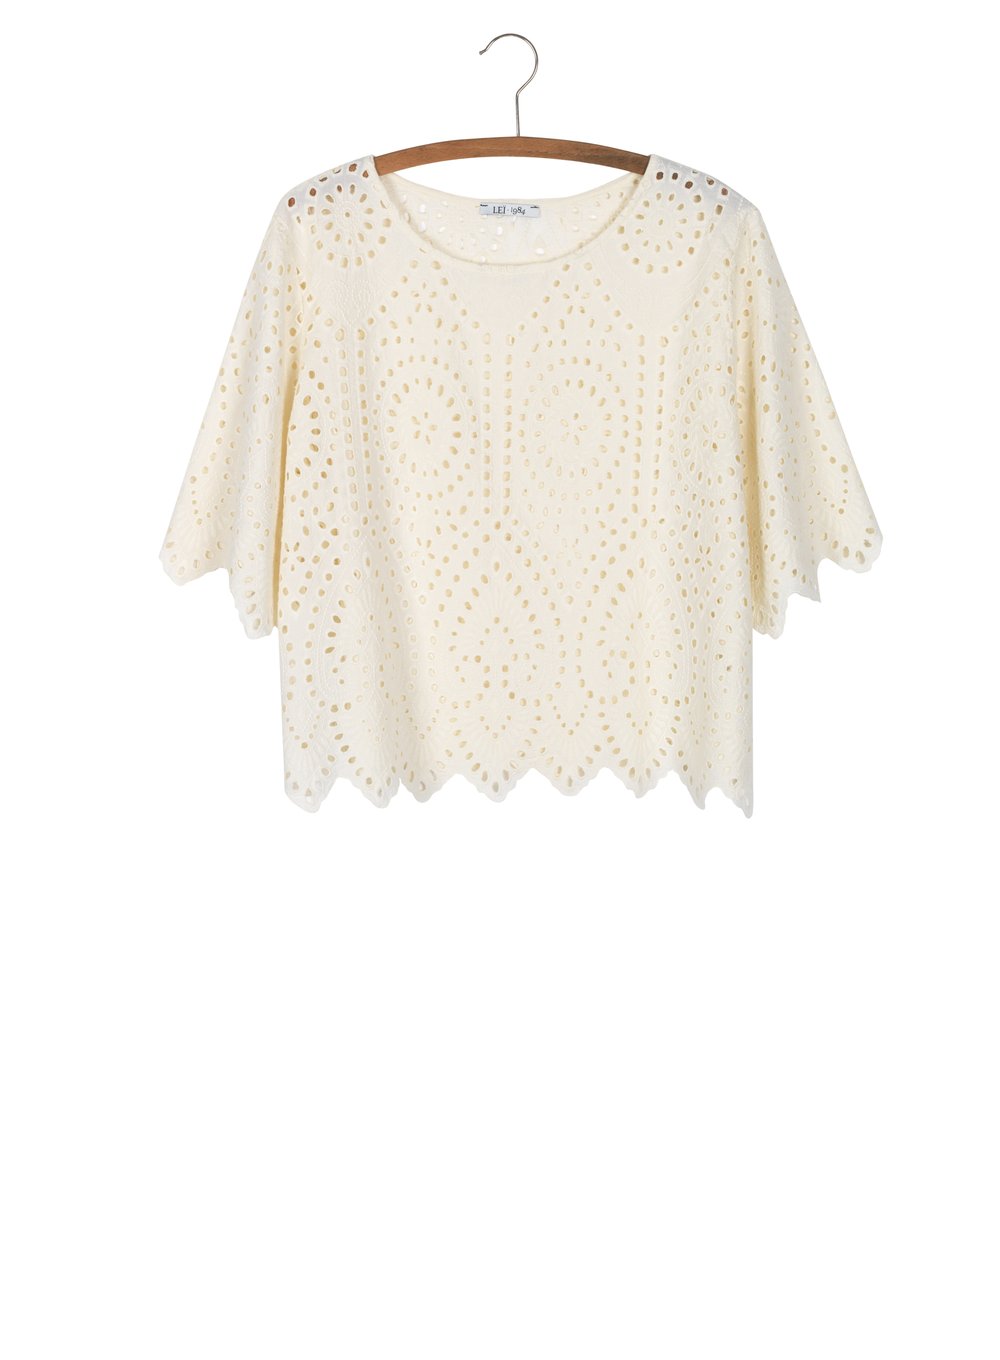 Image of Top broderie anglaise MARIA 125€ -60%